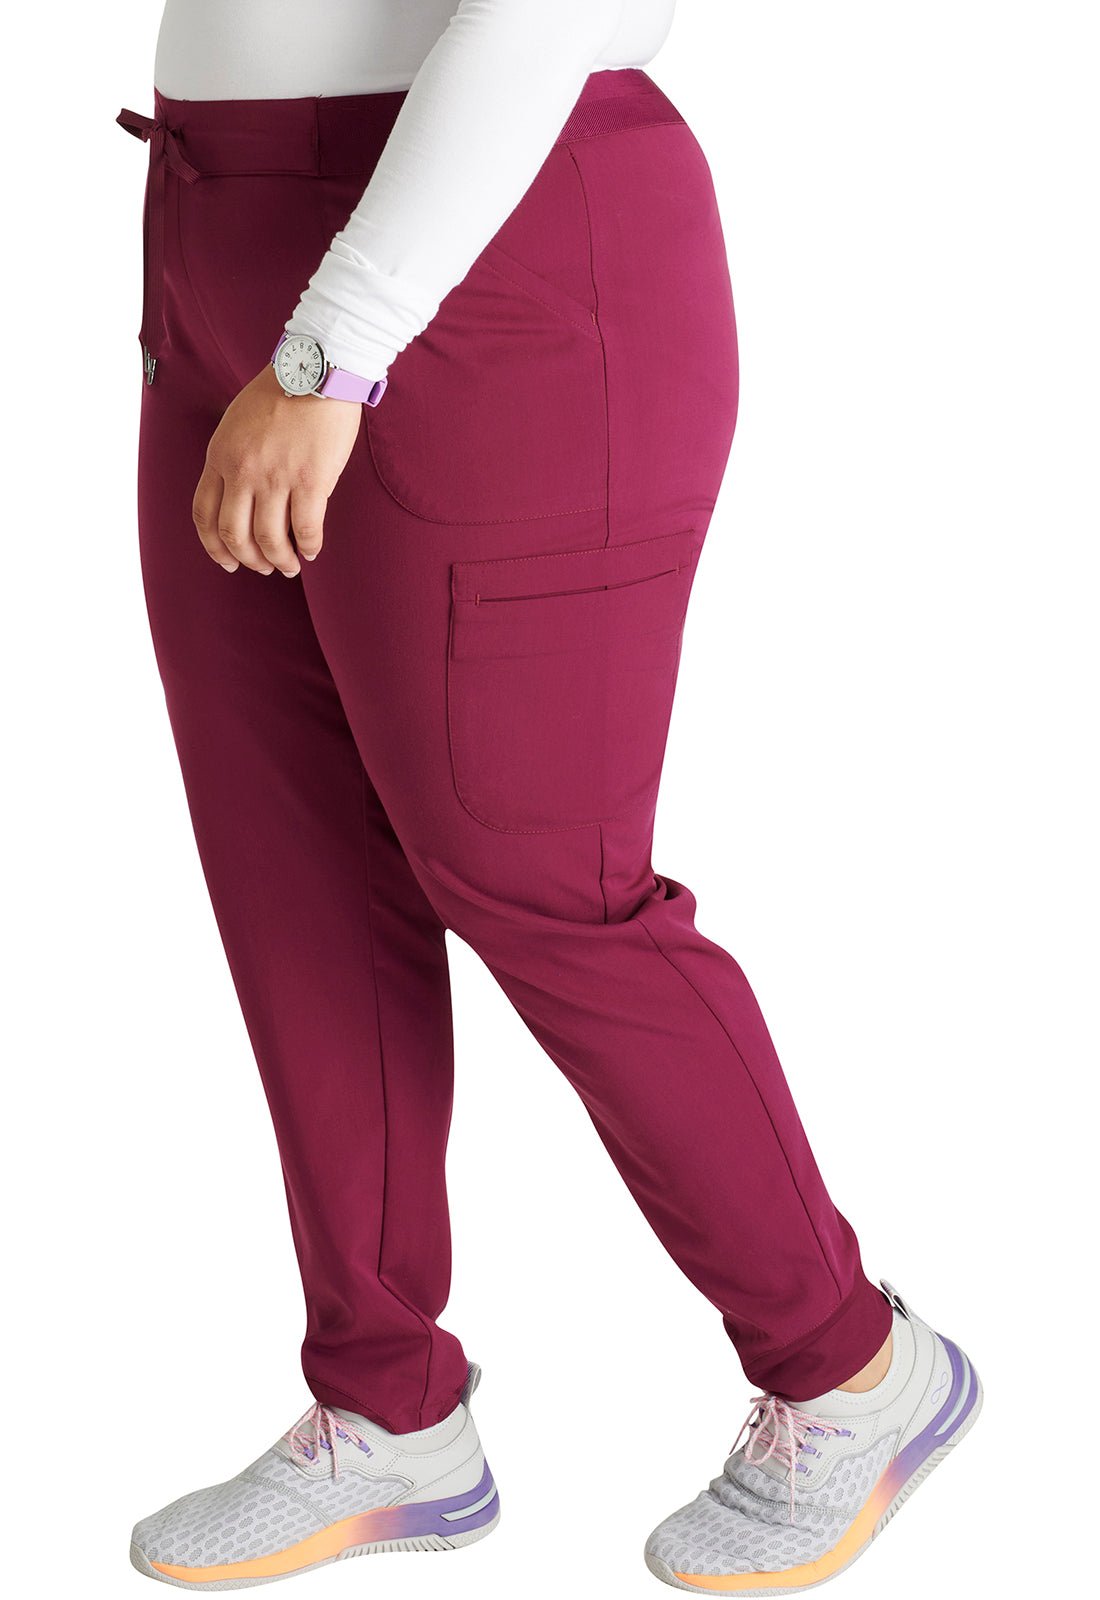 Cherokee Atmos Scrub Pull On Jogger Pant CK138A in Caribbean, Ciel, Teal, Wine - Scrubs Select